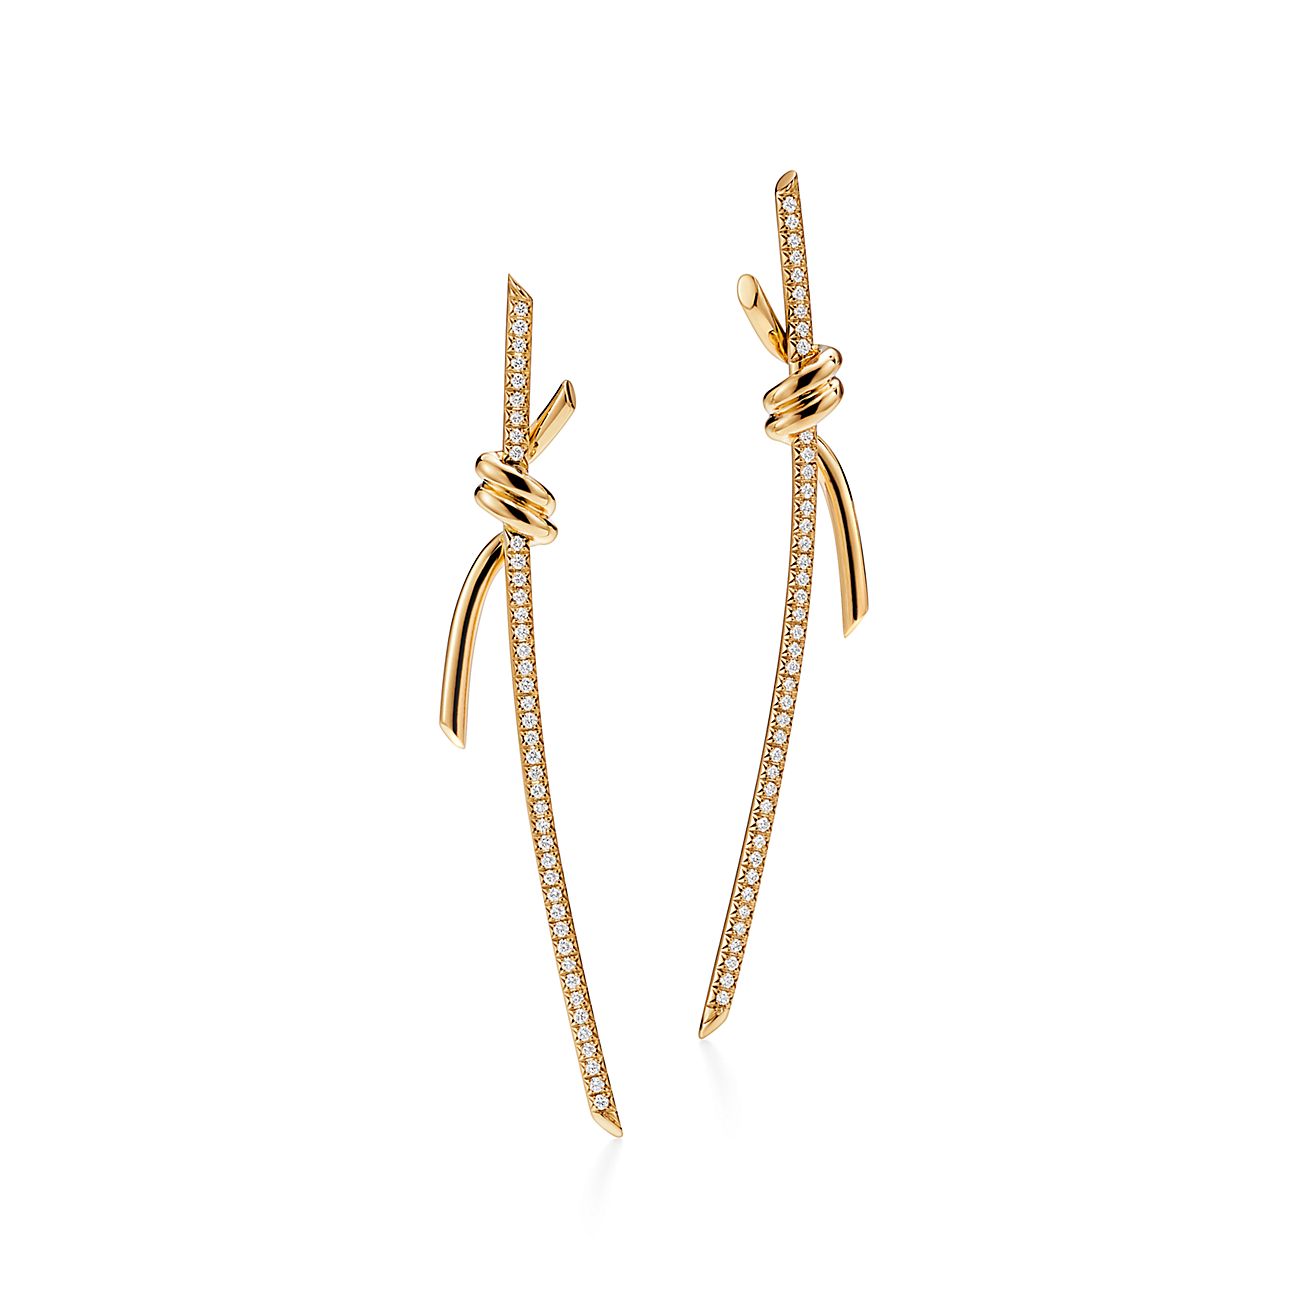 Tiffany Knot Drop Earrings in Yellow Gold with Diamonds | Tiffany & Co.